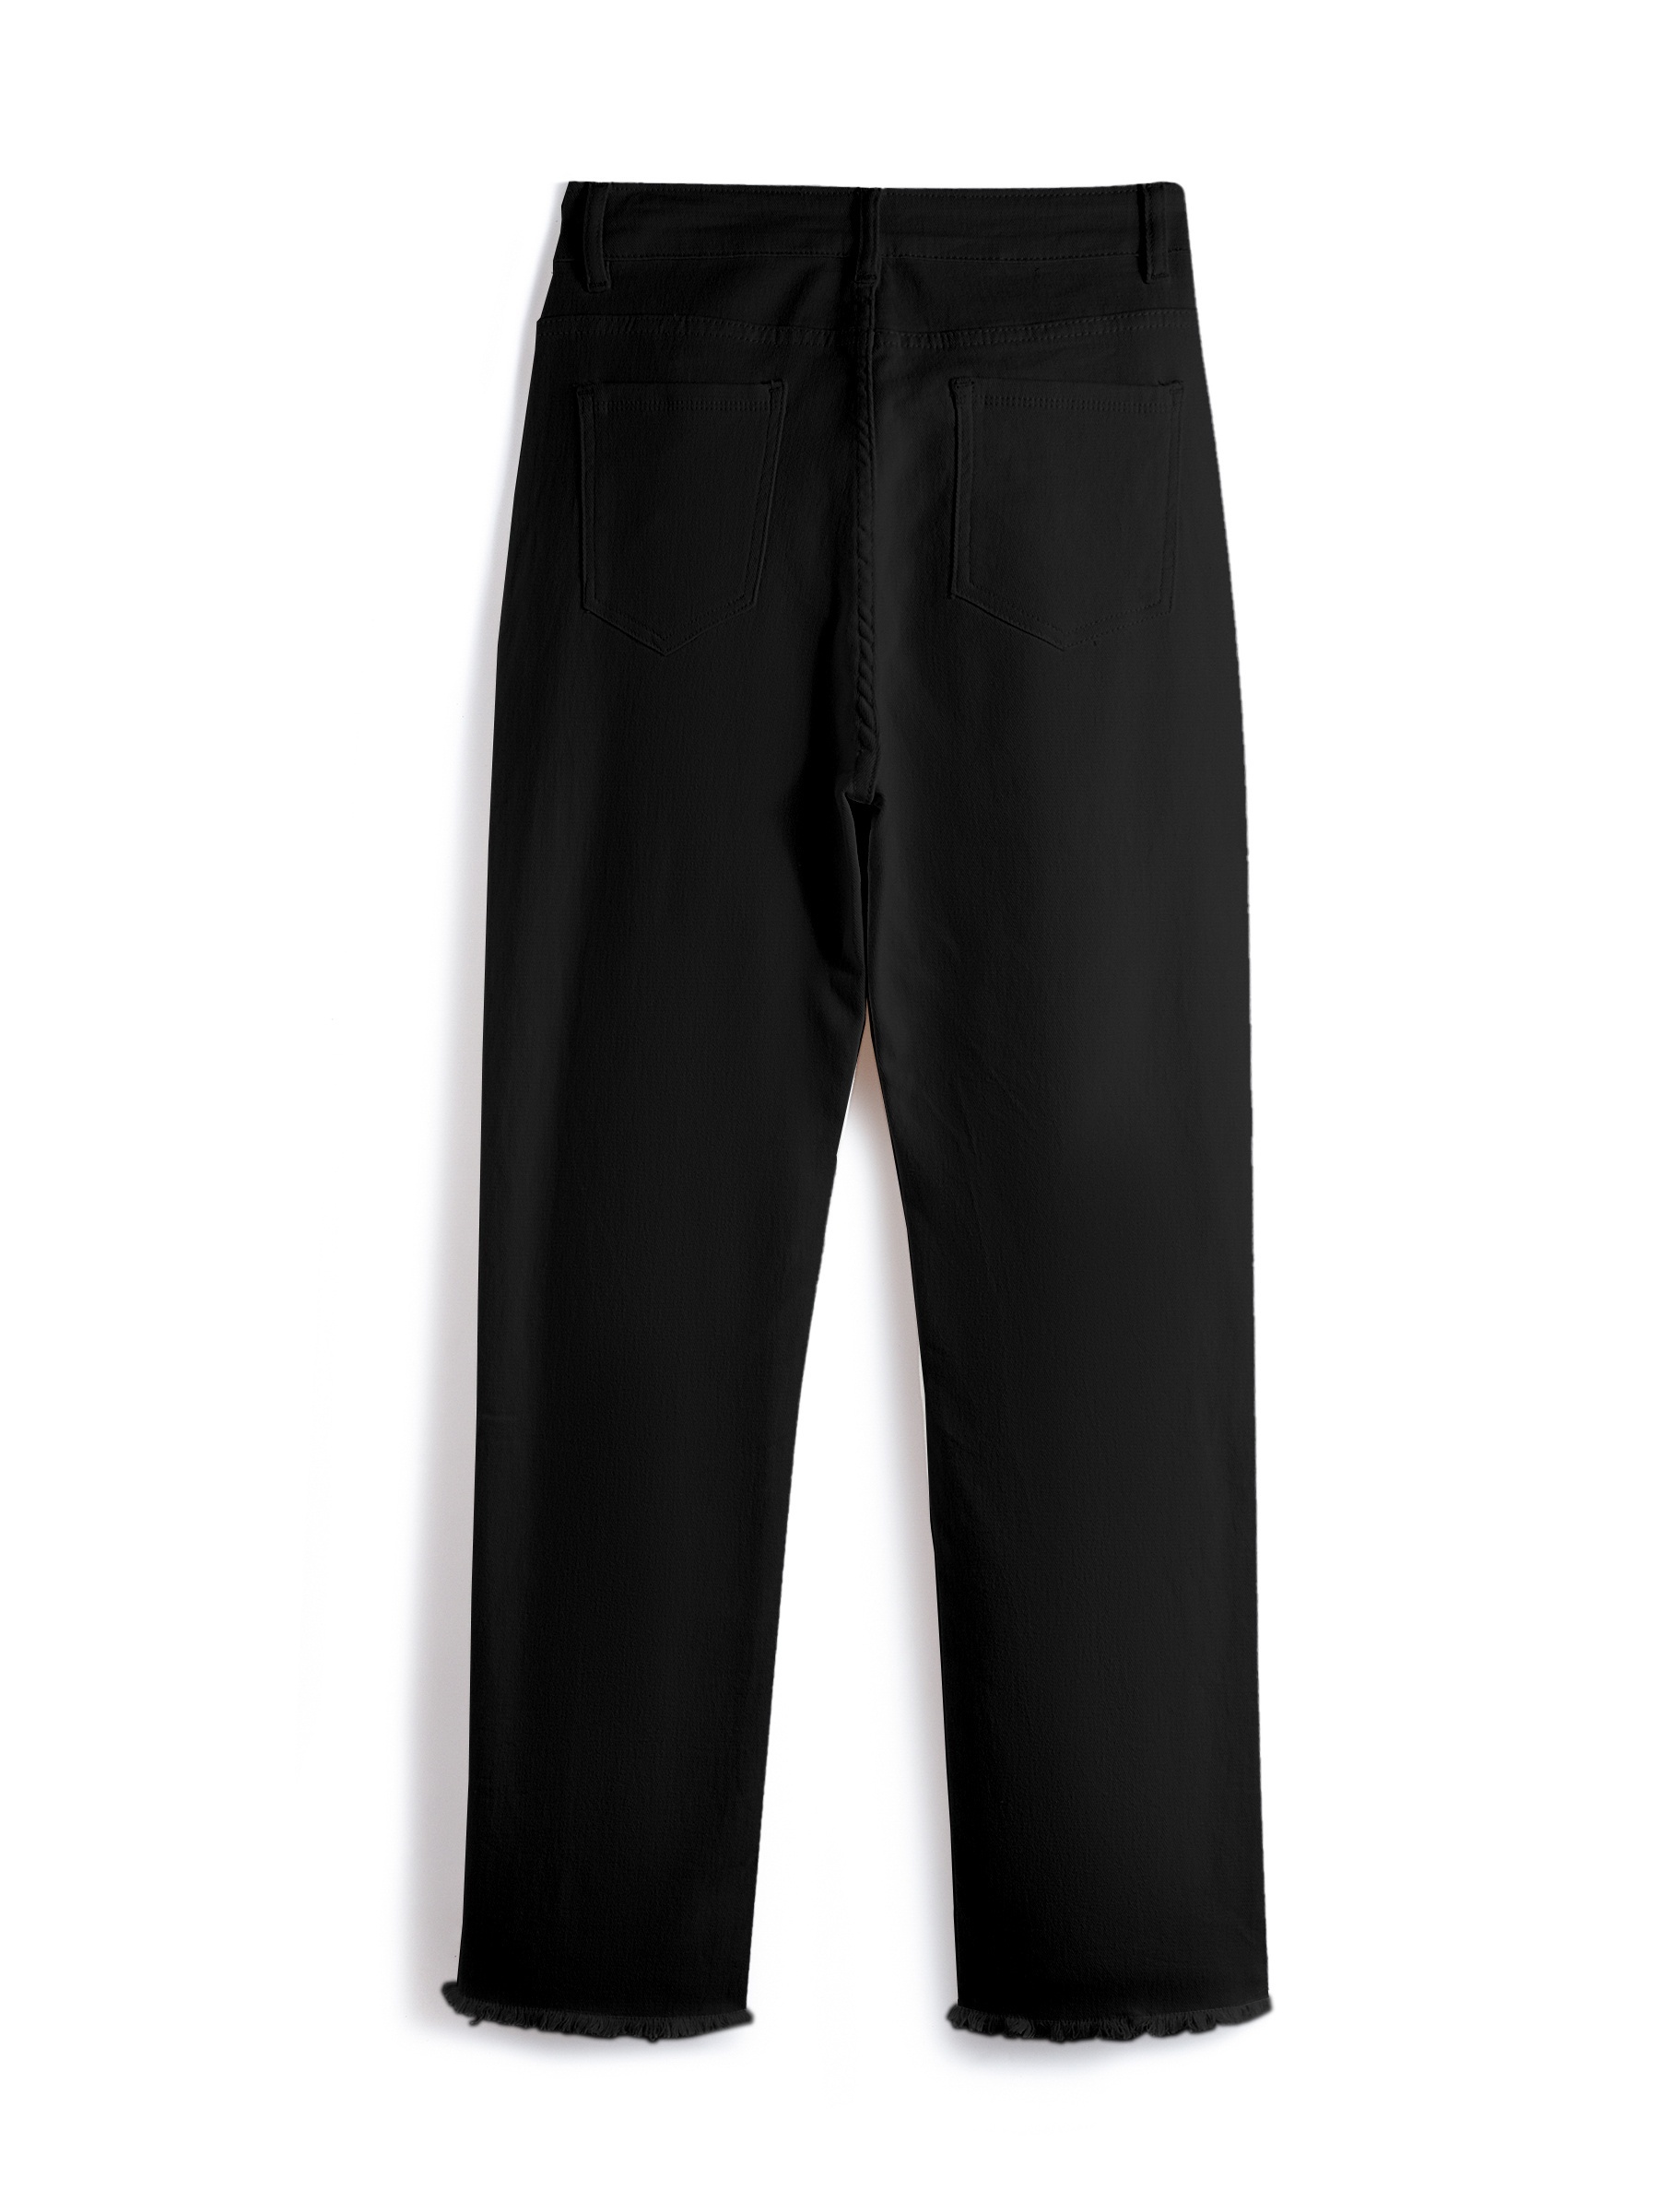 Emerge - Womens Jeans - Black Ankle Length - Solid Cotton Pants - Casual  Fashion - Winter - Elastane - Stud Hem - Slim Trousers - Office Work  Clothes - Black